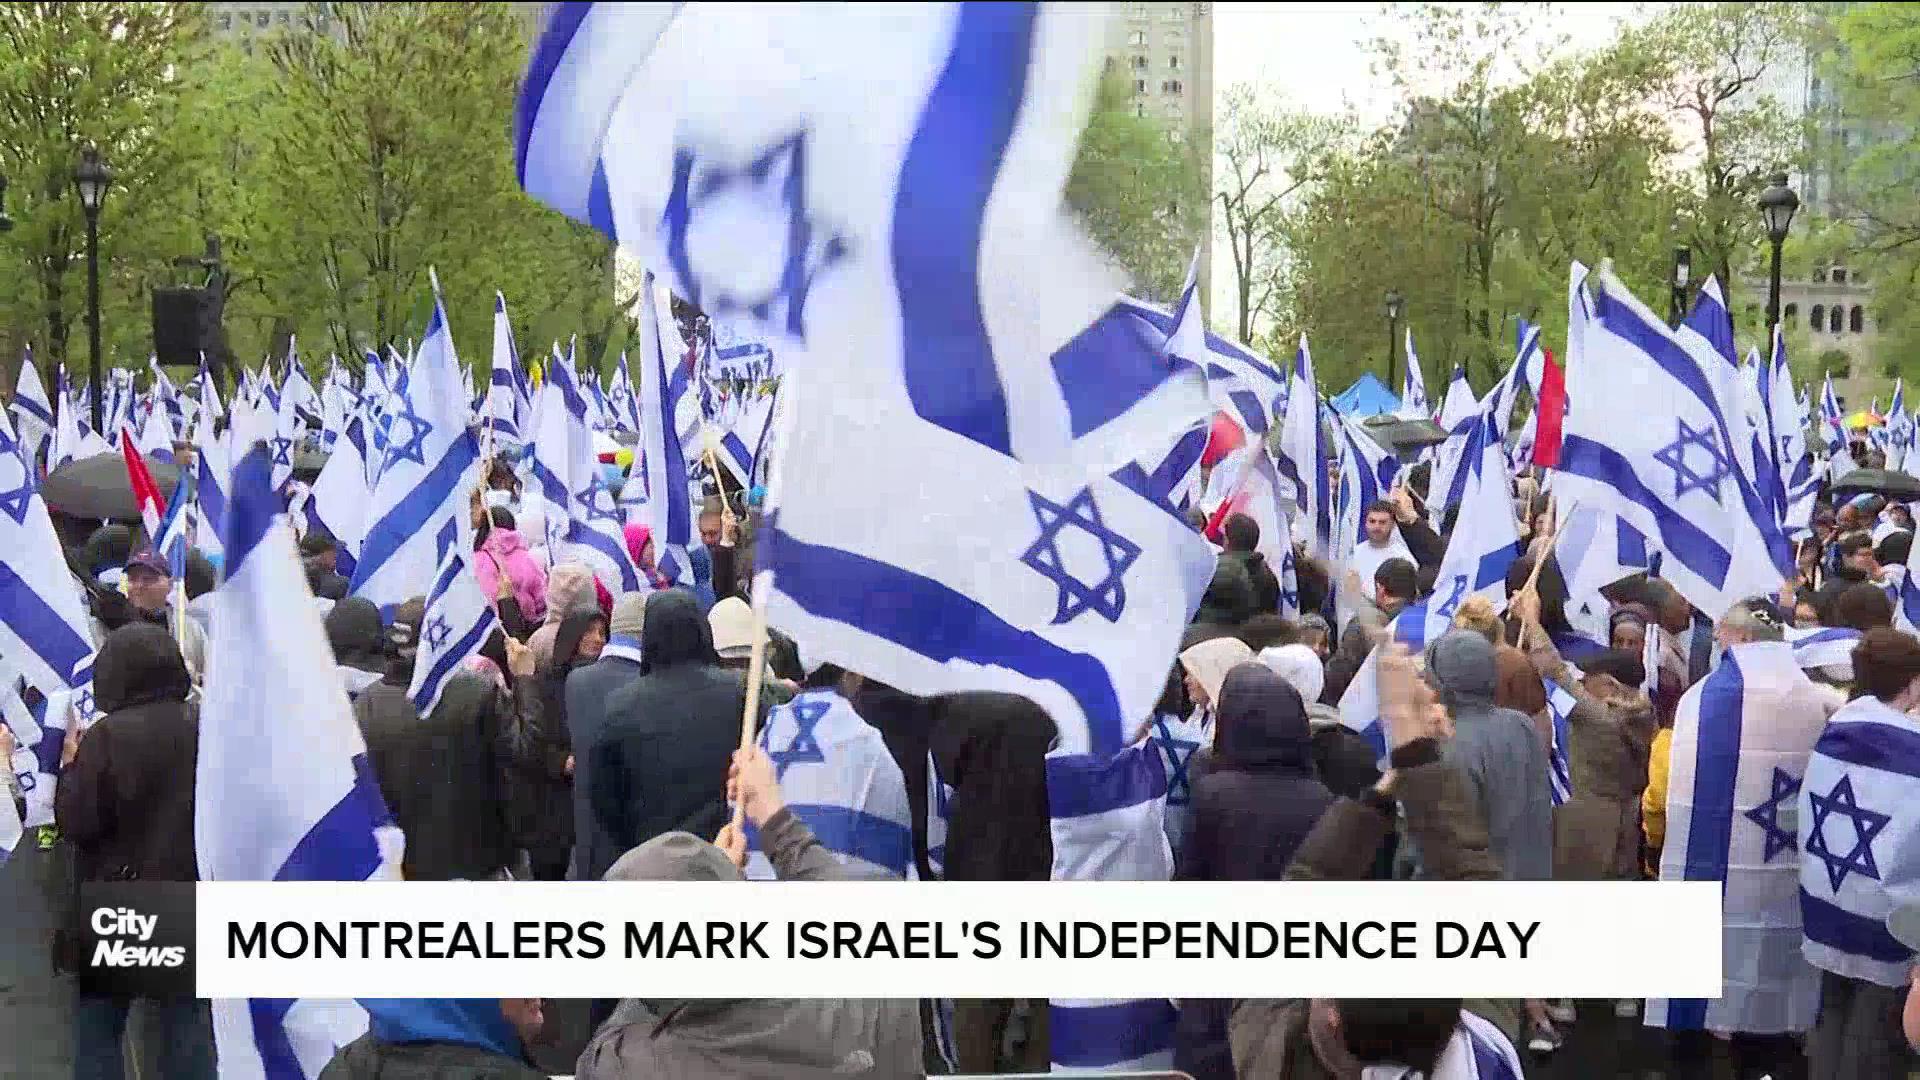 Montrealers come together for Israel’s Independence day